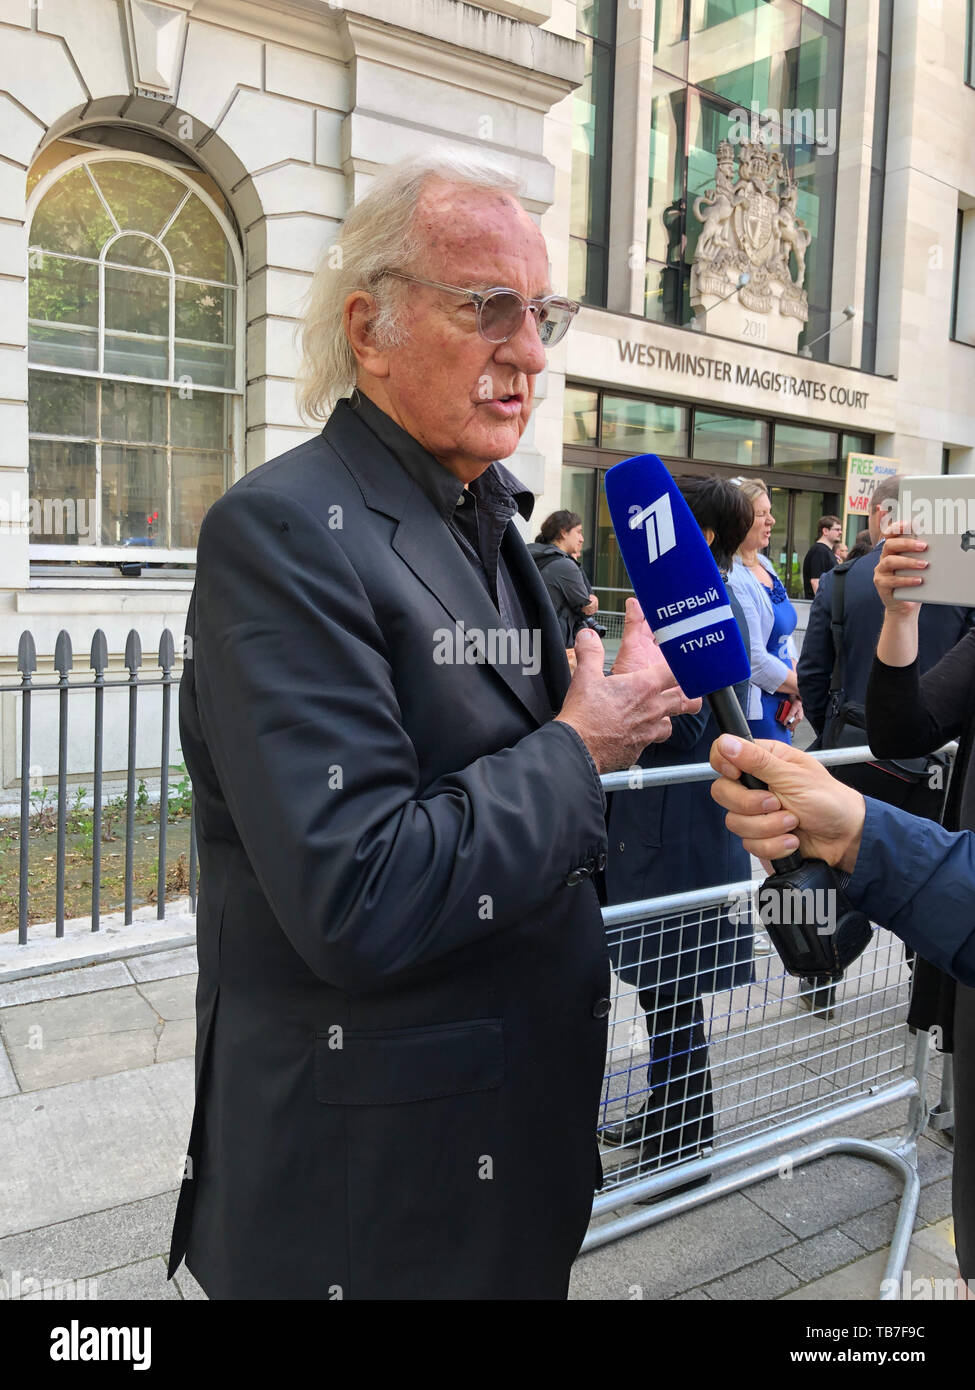 John Pilger outside Westminster Magistrates Court where WikiLeaks founder Julian Assange is expected to appear via videolink as he continues to fight against extradition to the United States over allegations he conspired to break into a classified Pentagon computer. Stock Photo